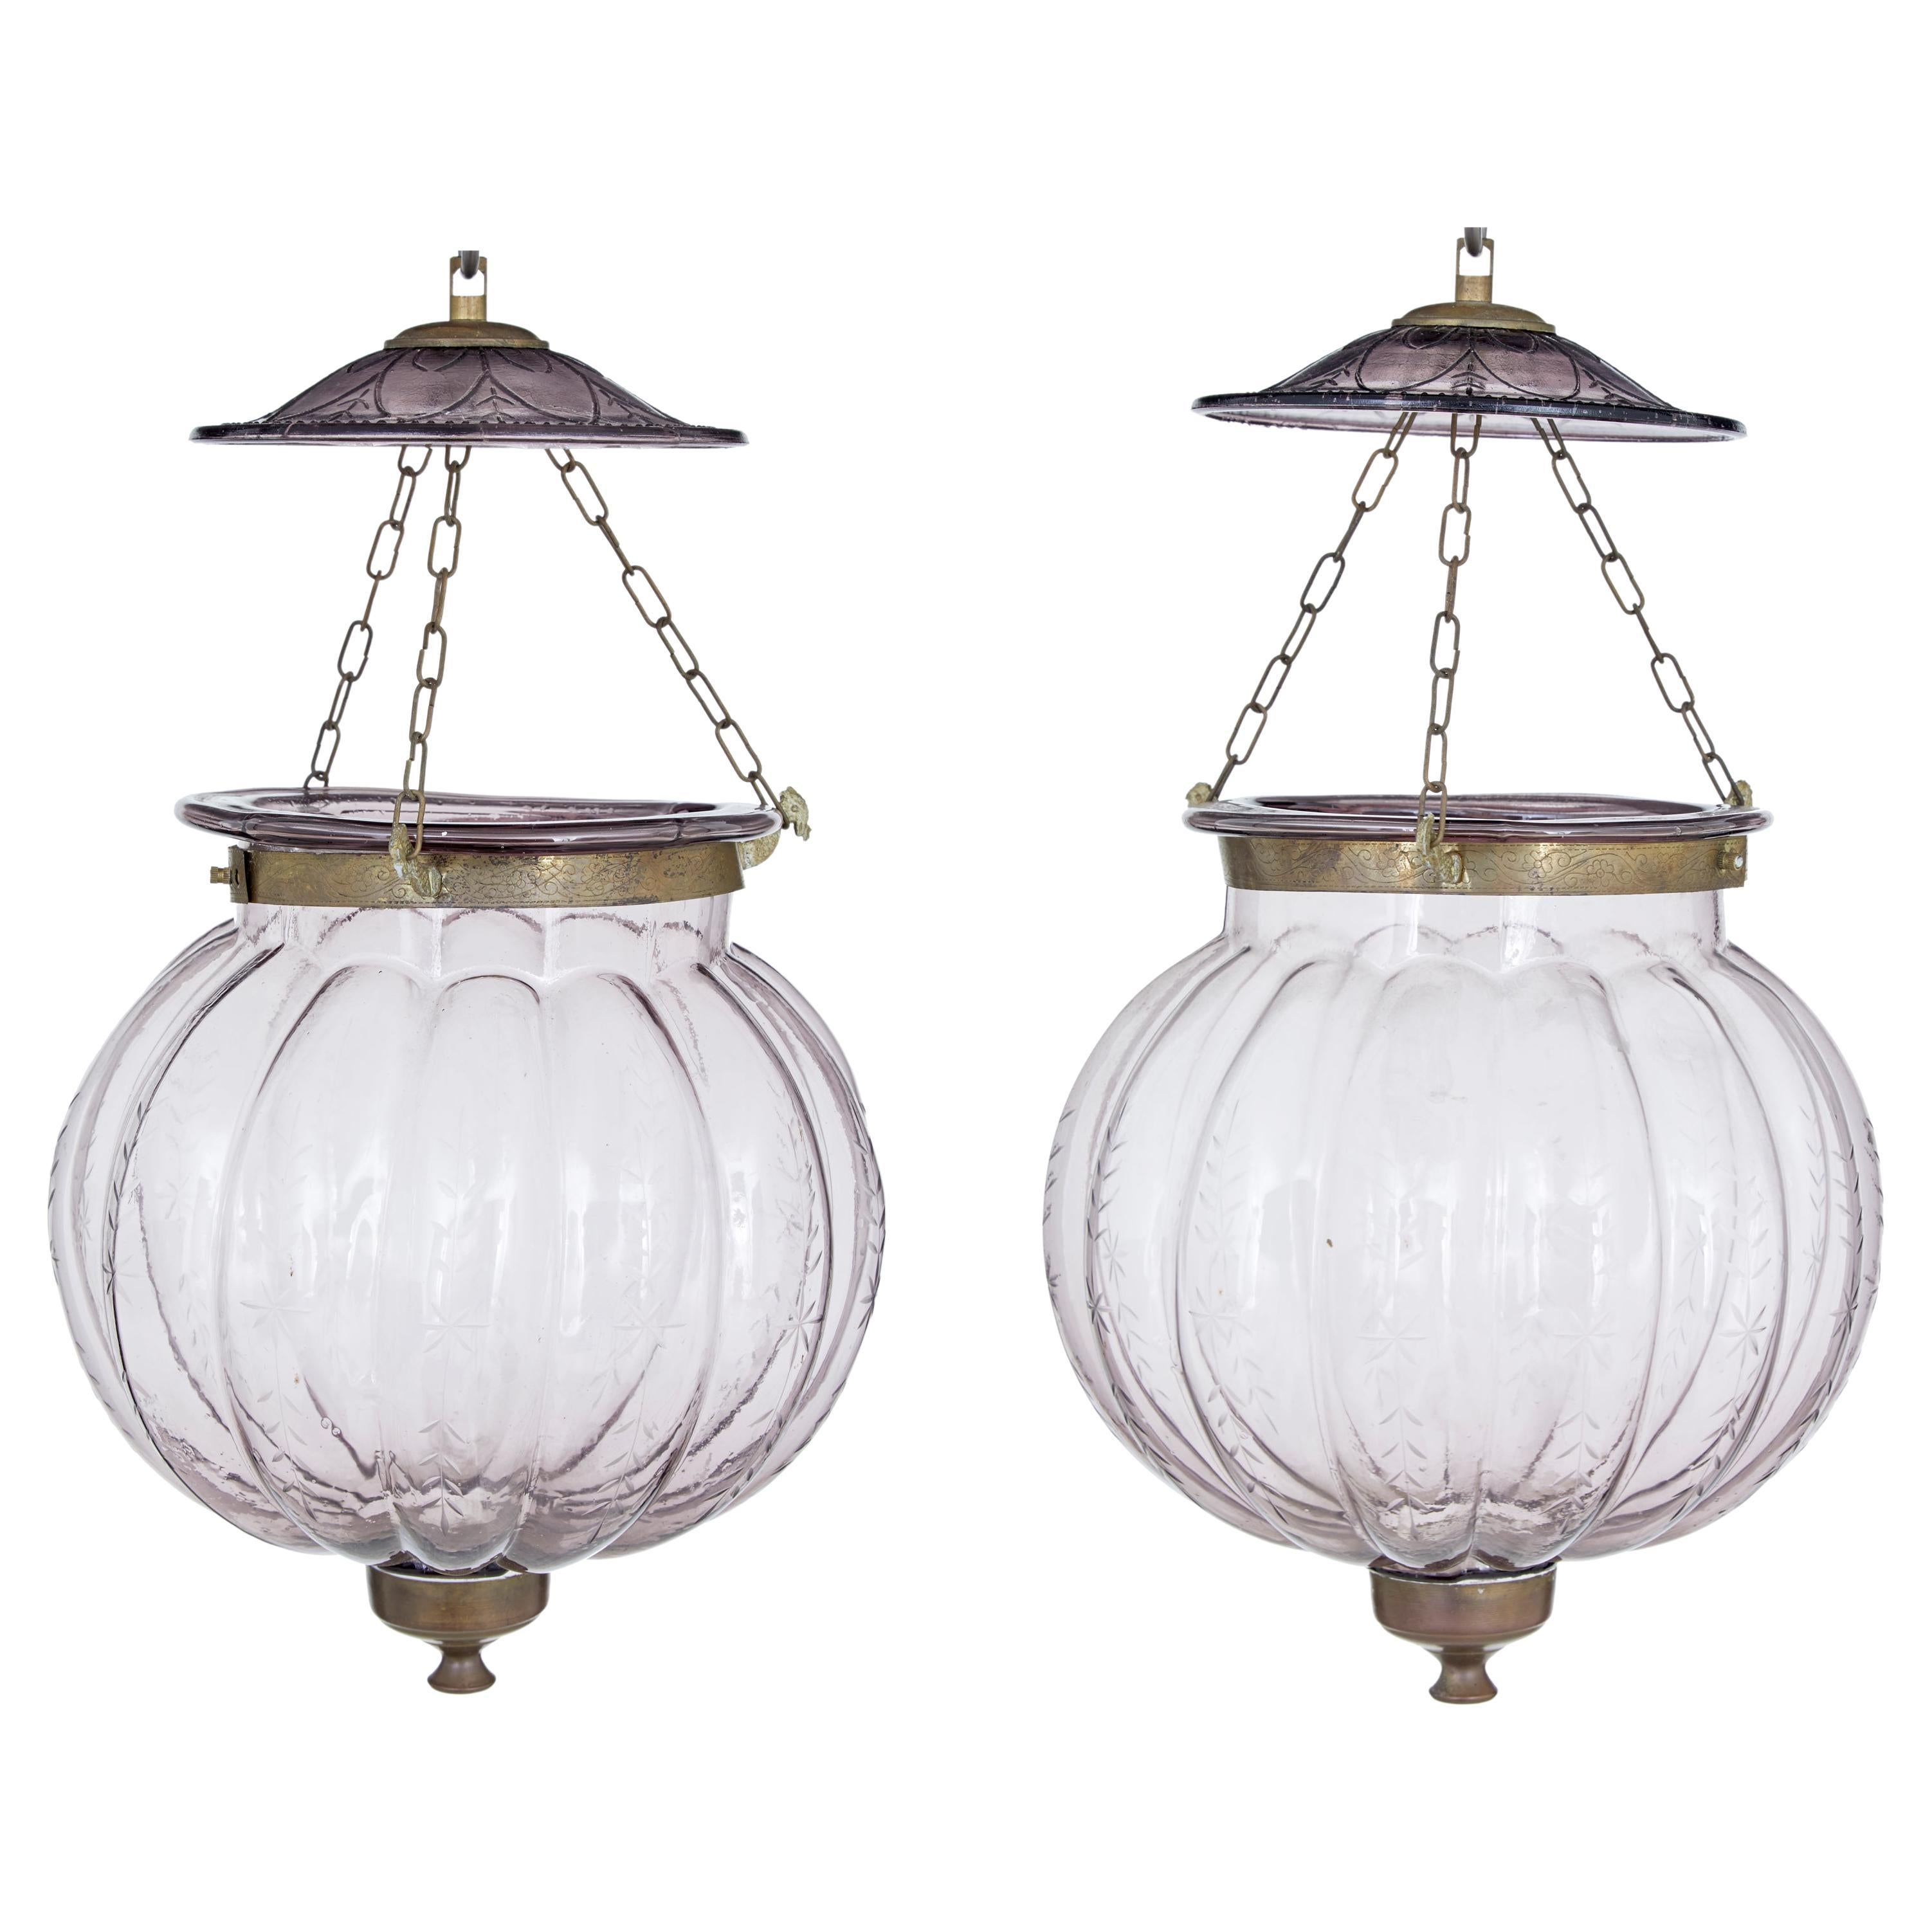 Pair of early 20th century french glass hanging lanterns For Sale